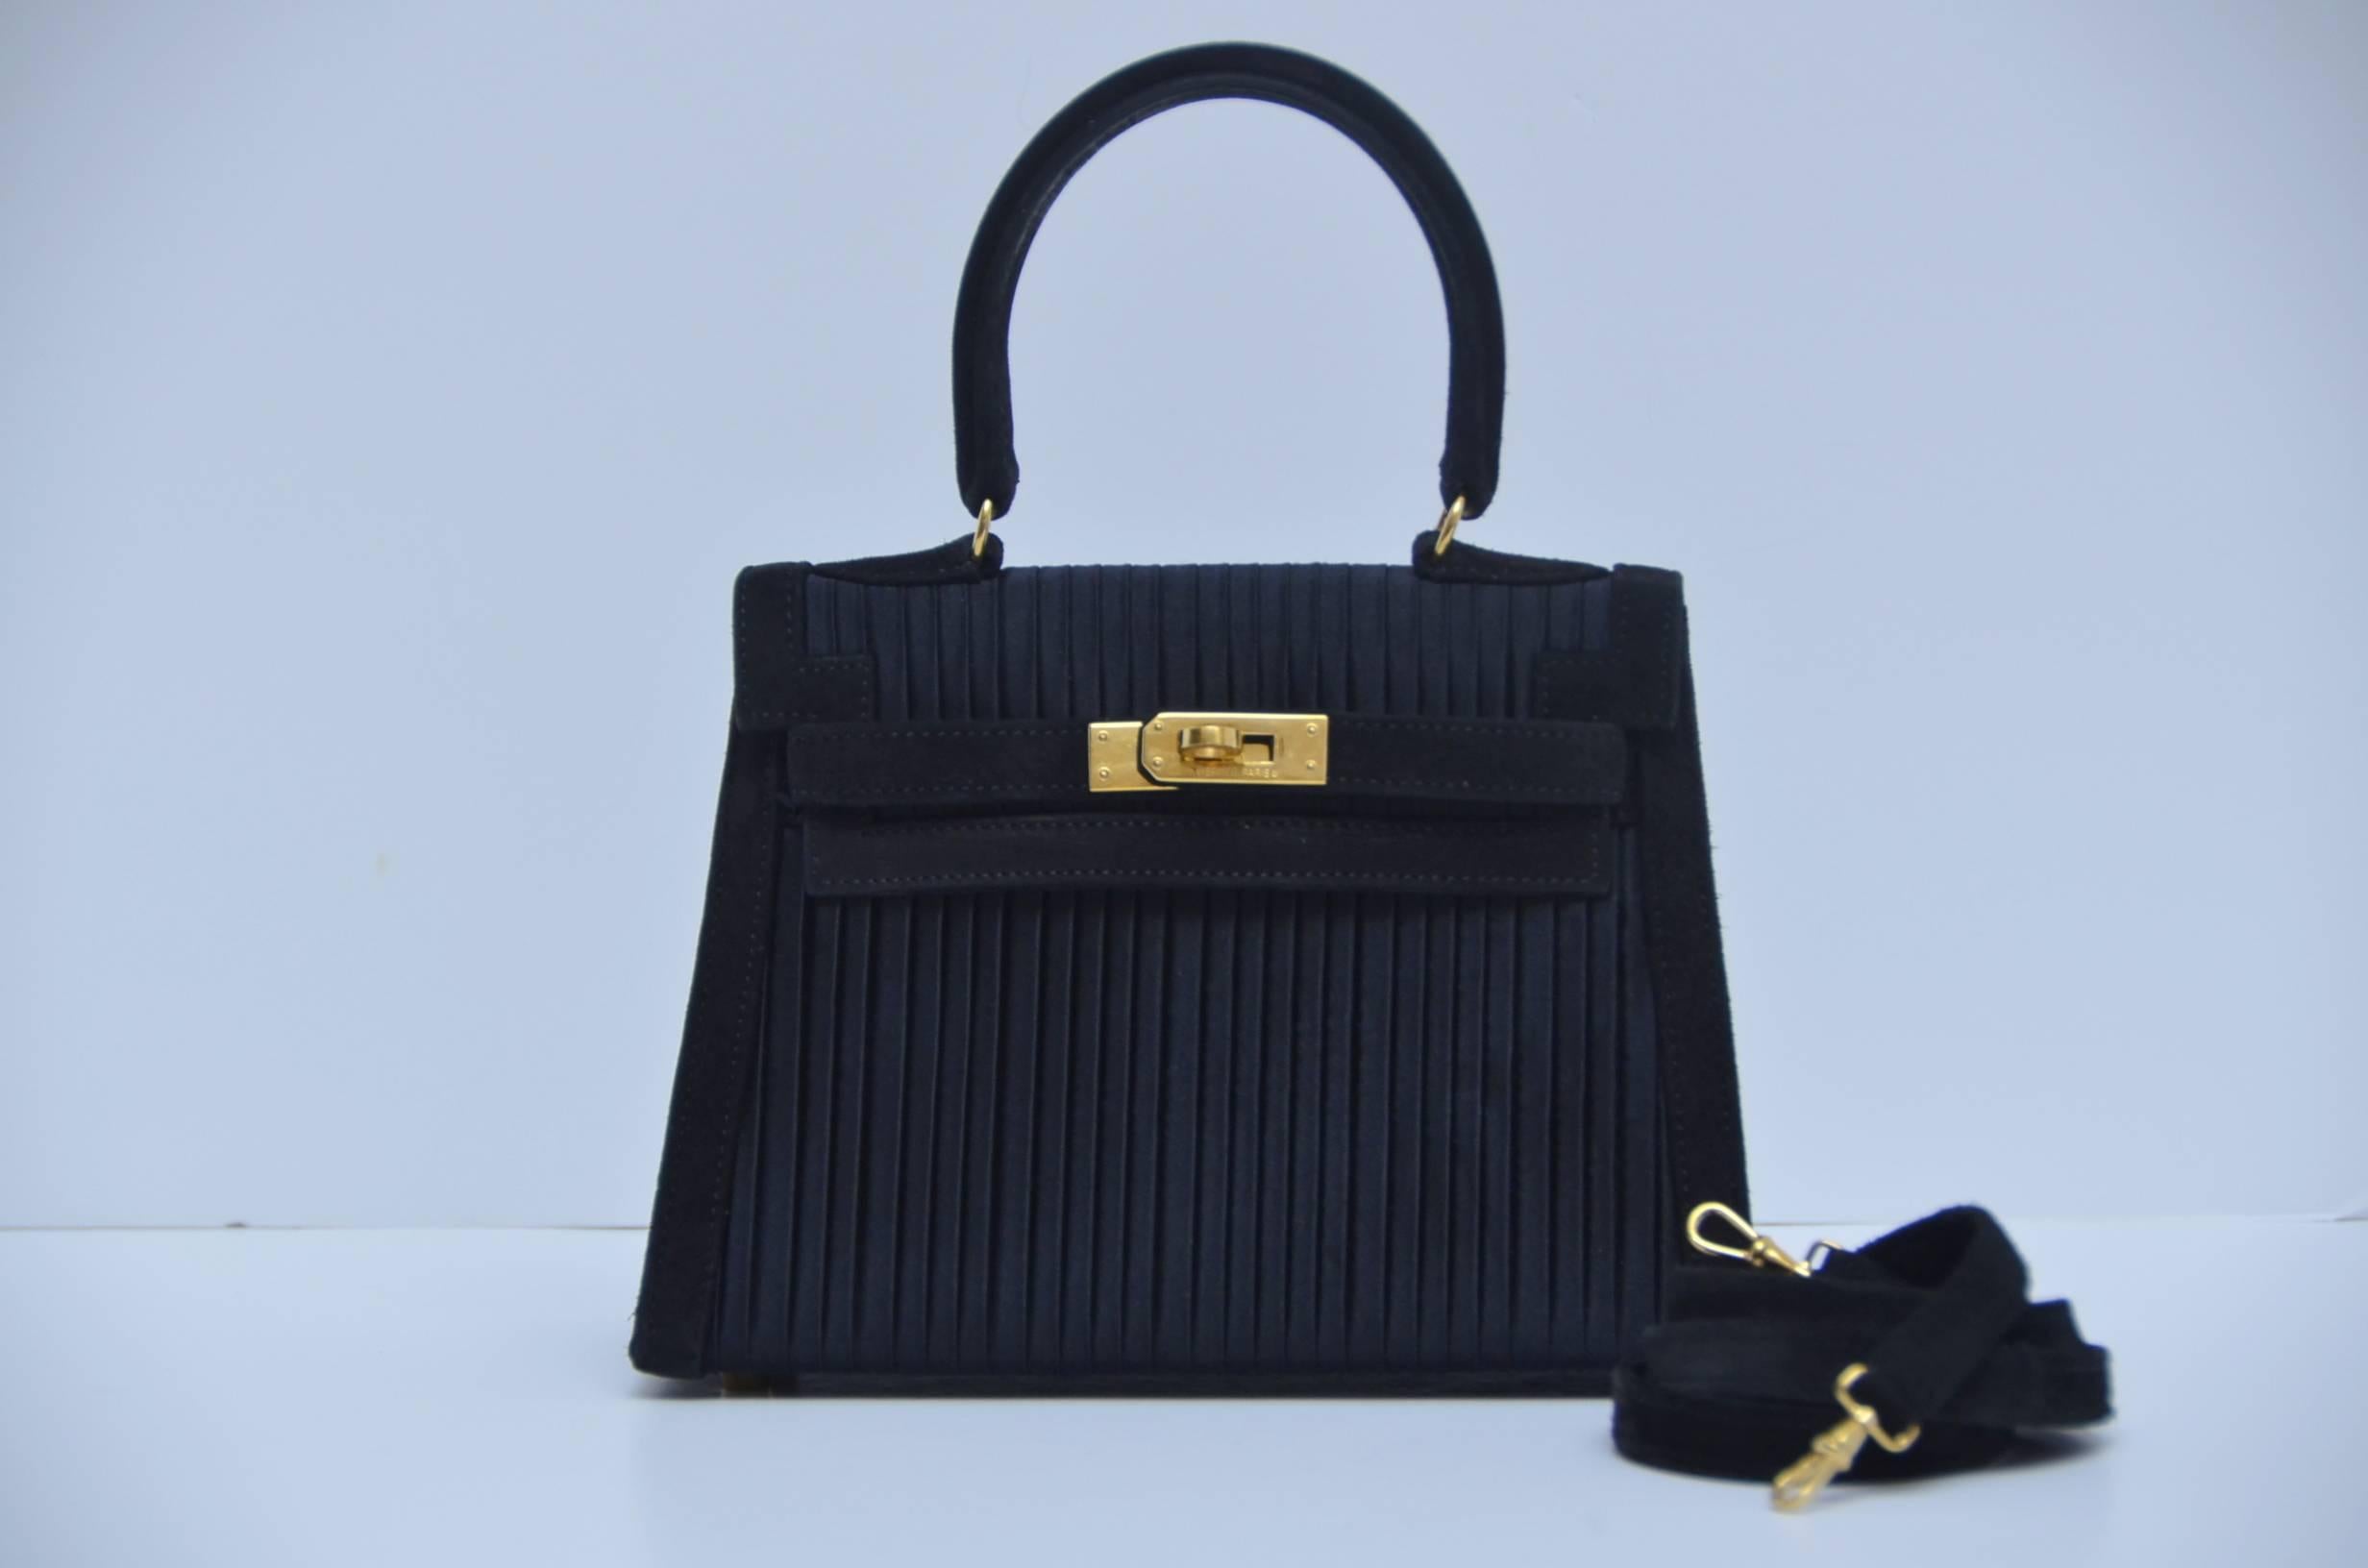 Extremely rare Hermes Mini Kelly bag 20 cm black pleated Satin & Veau Doblis suede leather with gold hardware.
Definitely collector's piece.....
Excellent mint vintage condition.Satin and suede in excellent condition,couple tiny marks inside.Lined